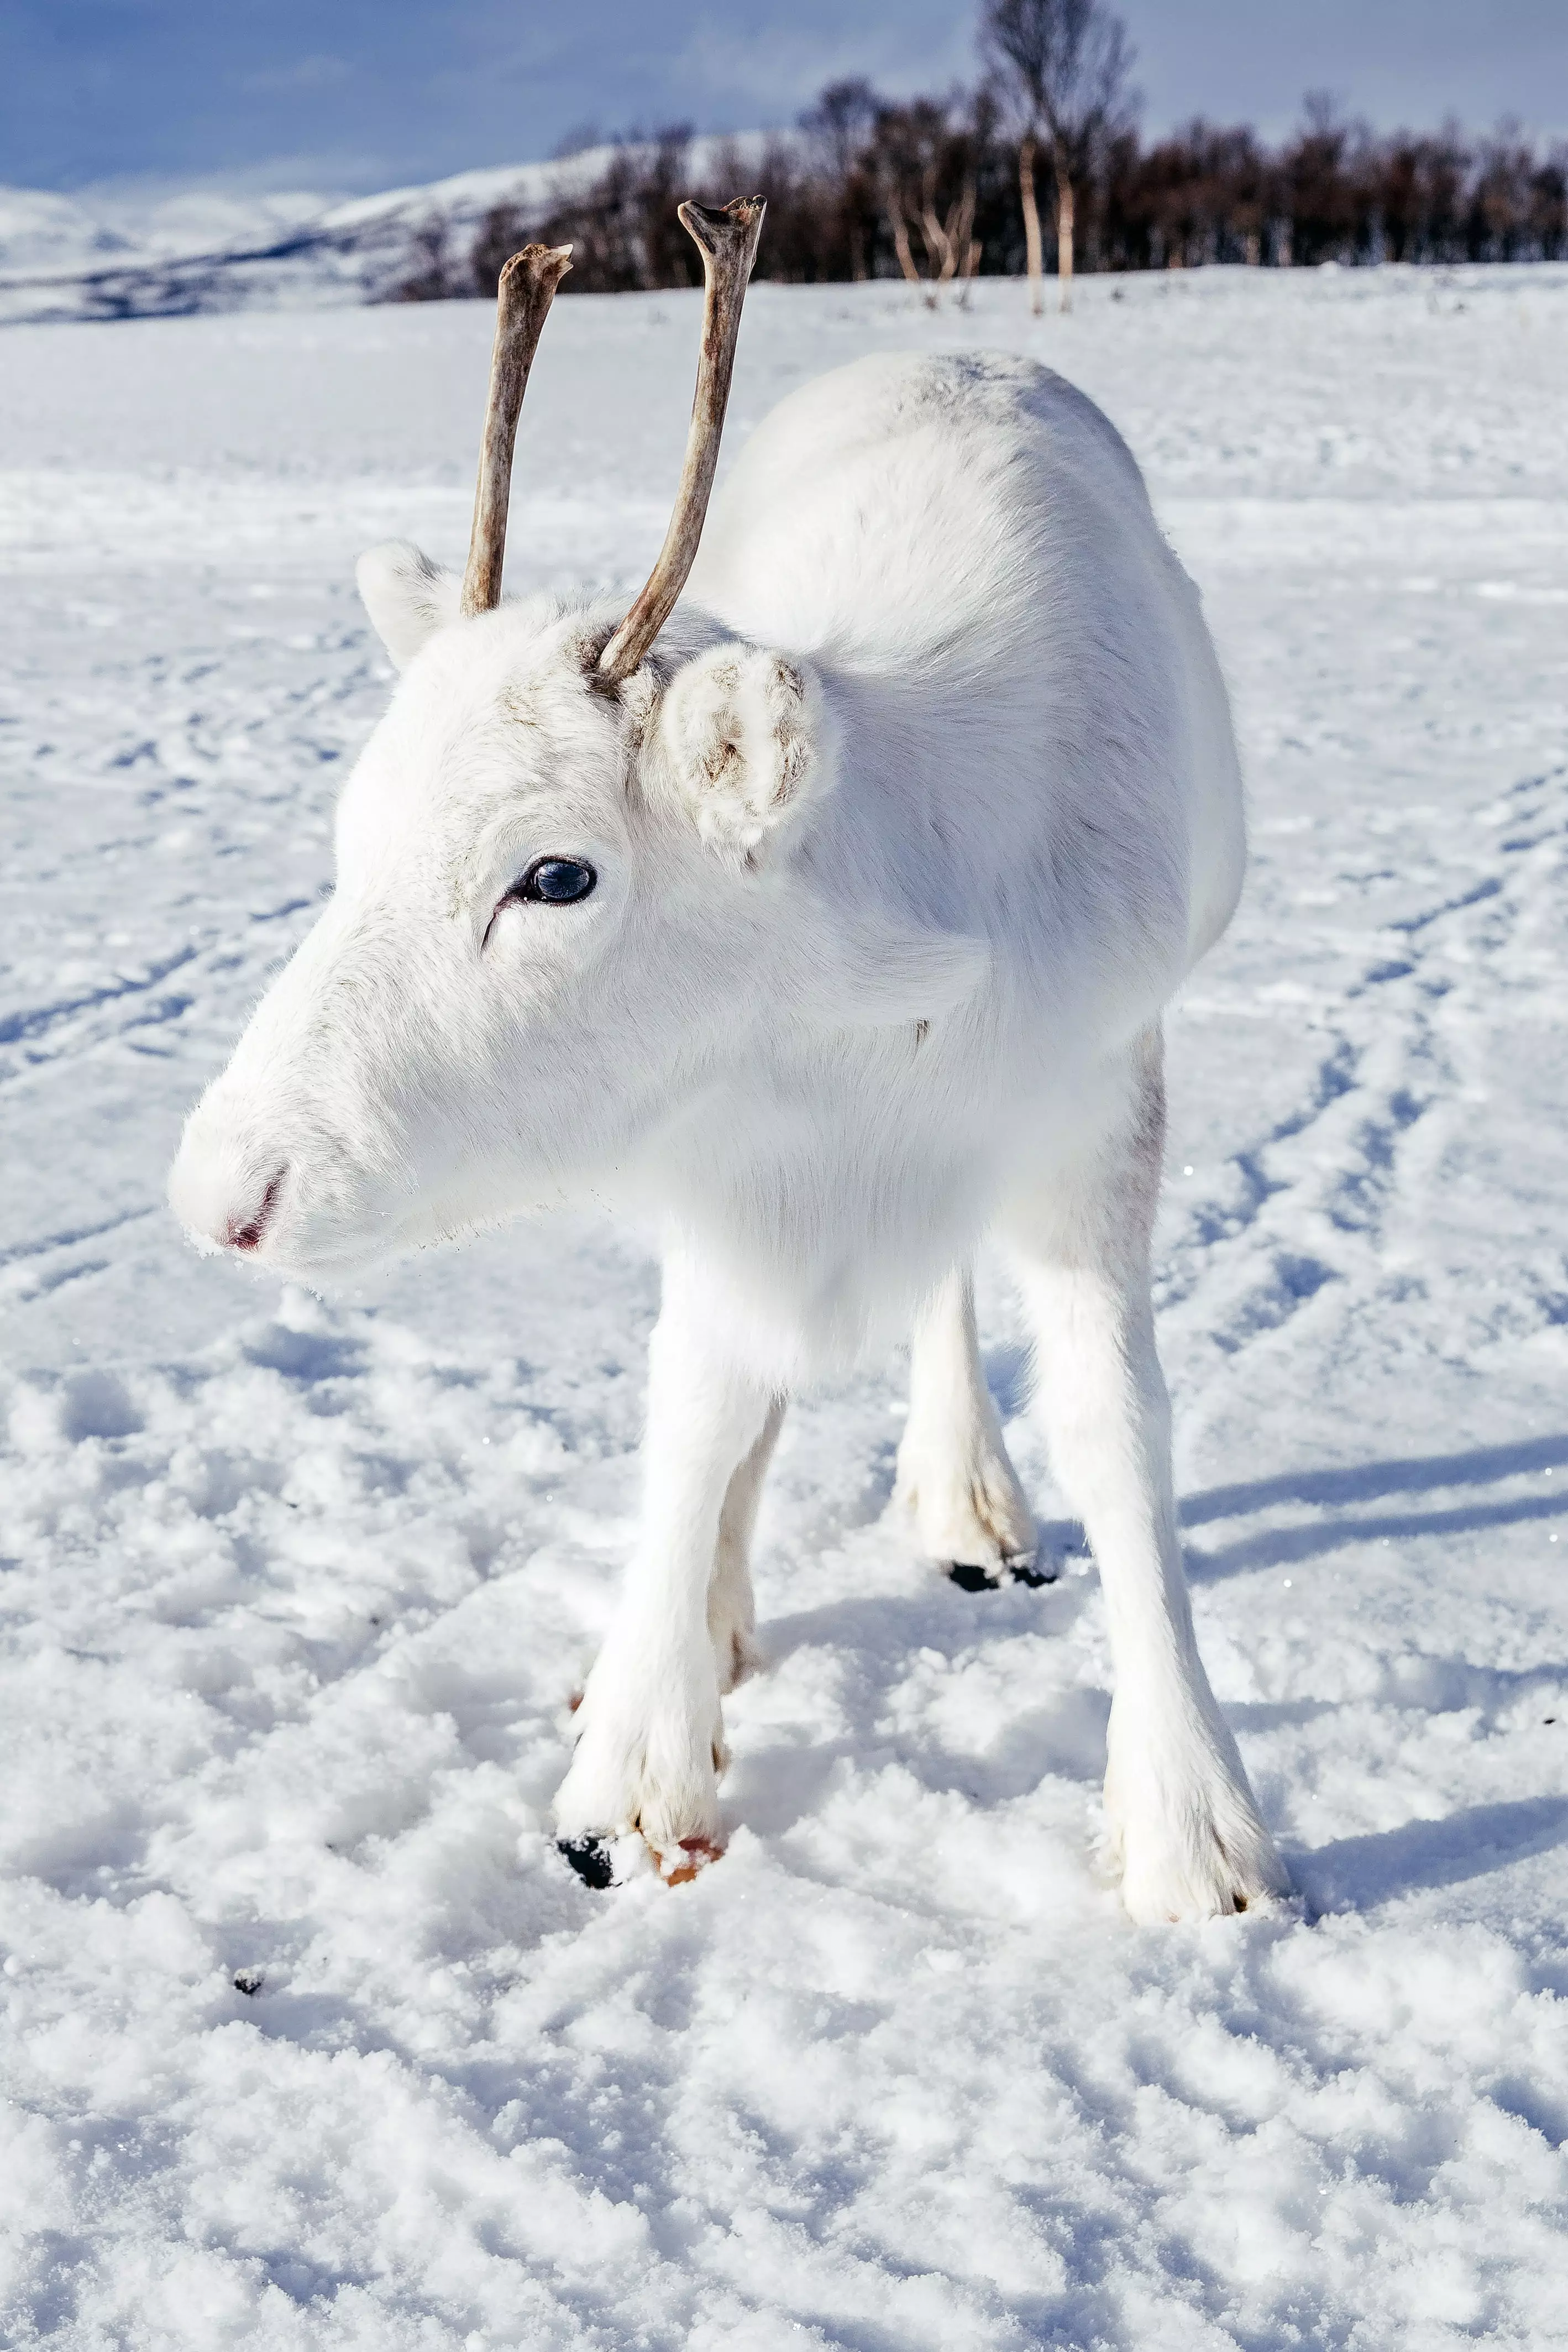 The reindeer has a rare genetic mutation meaning its fur is pure white.